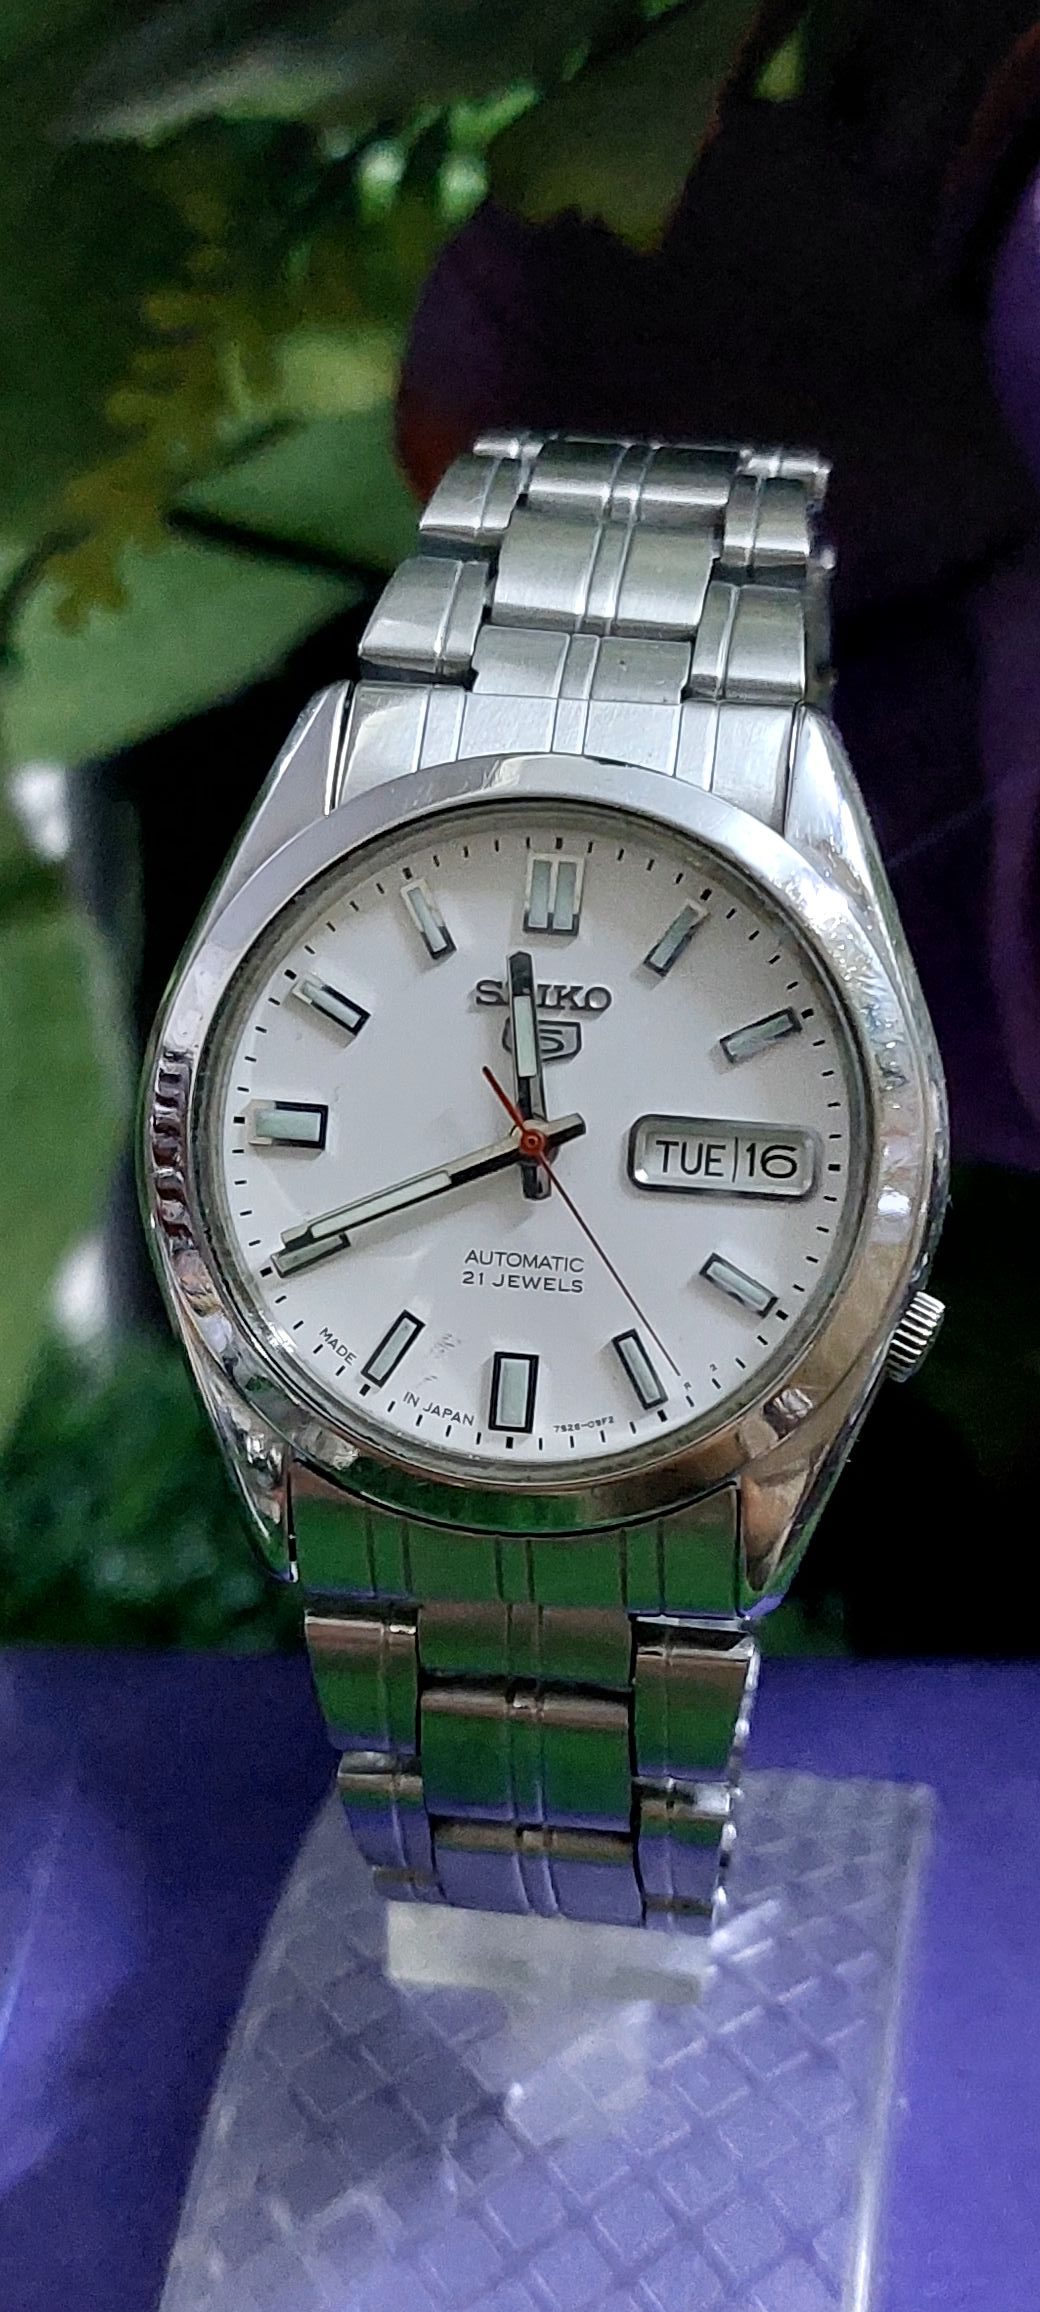 Beautiful Seiko 5 7s26 white color Dial Japan made Automatic watch for Men